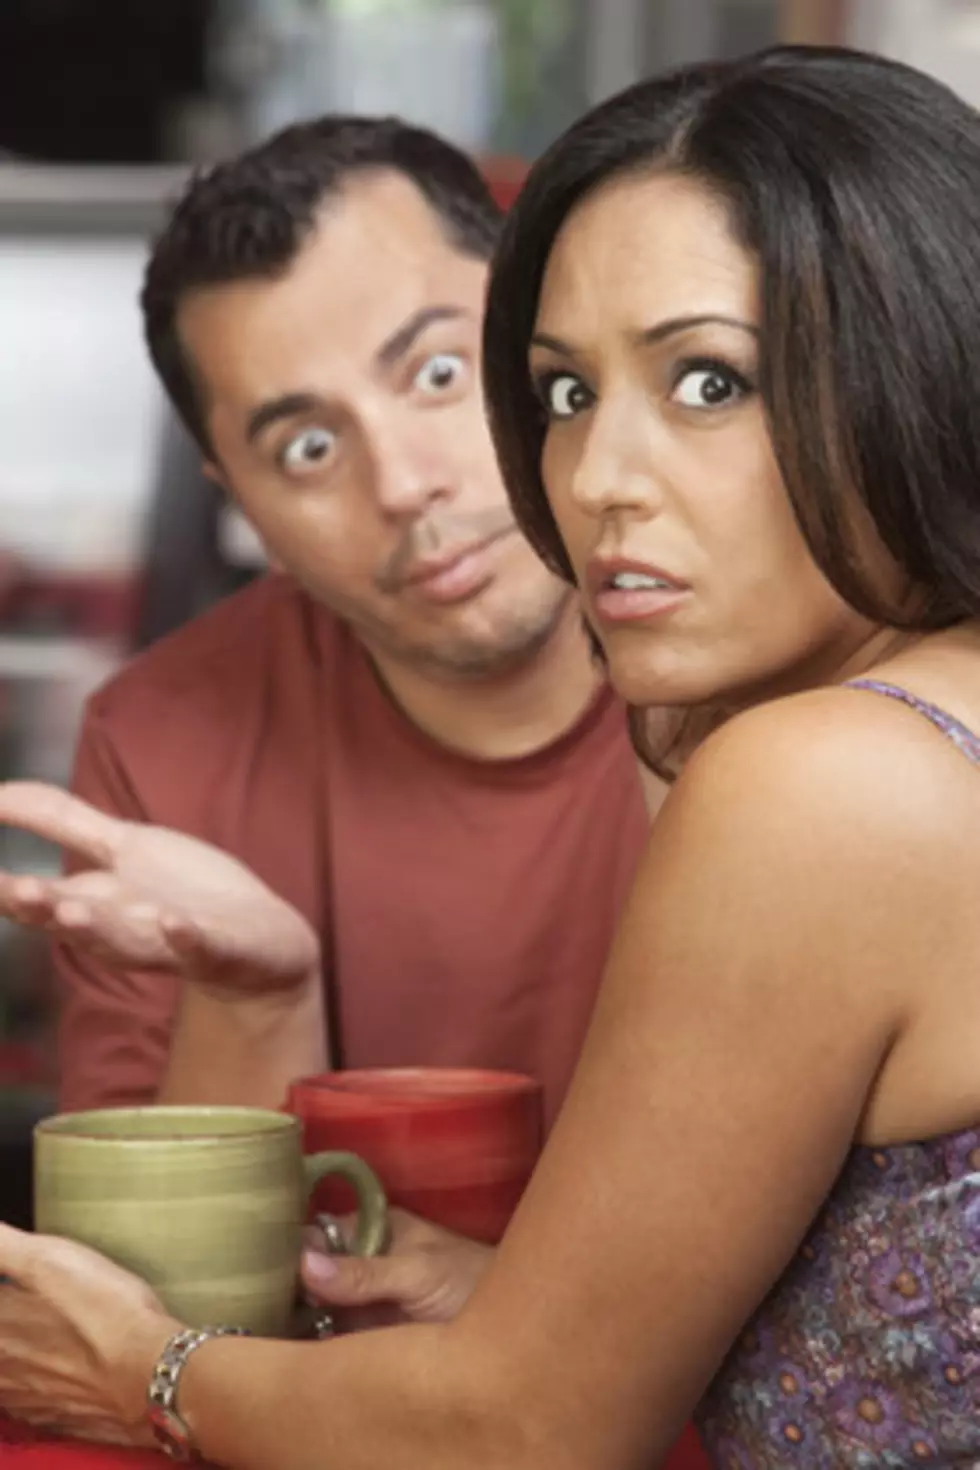 Weird Things Couples Fight About